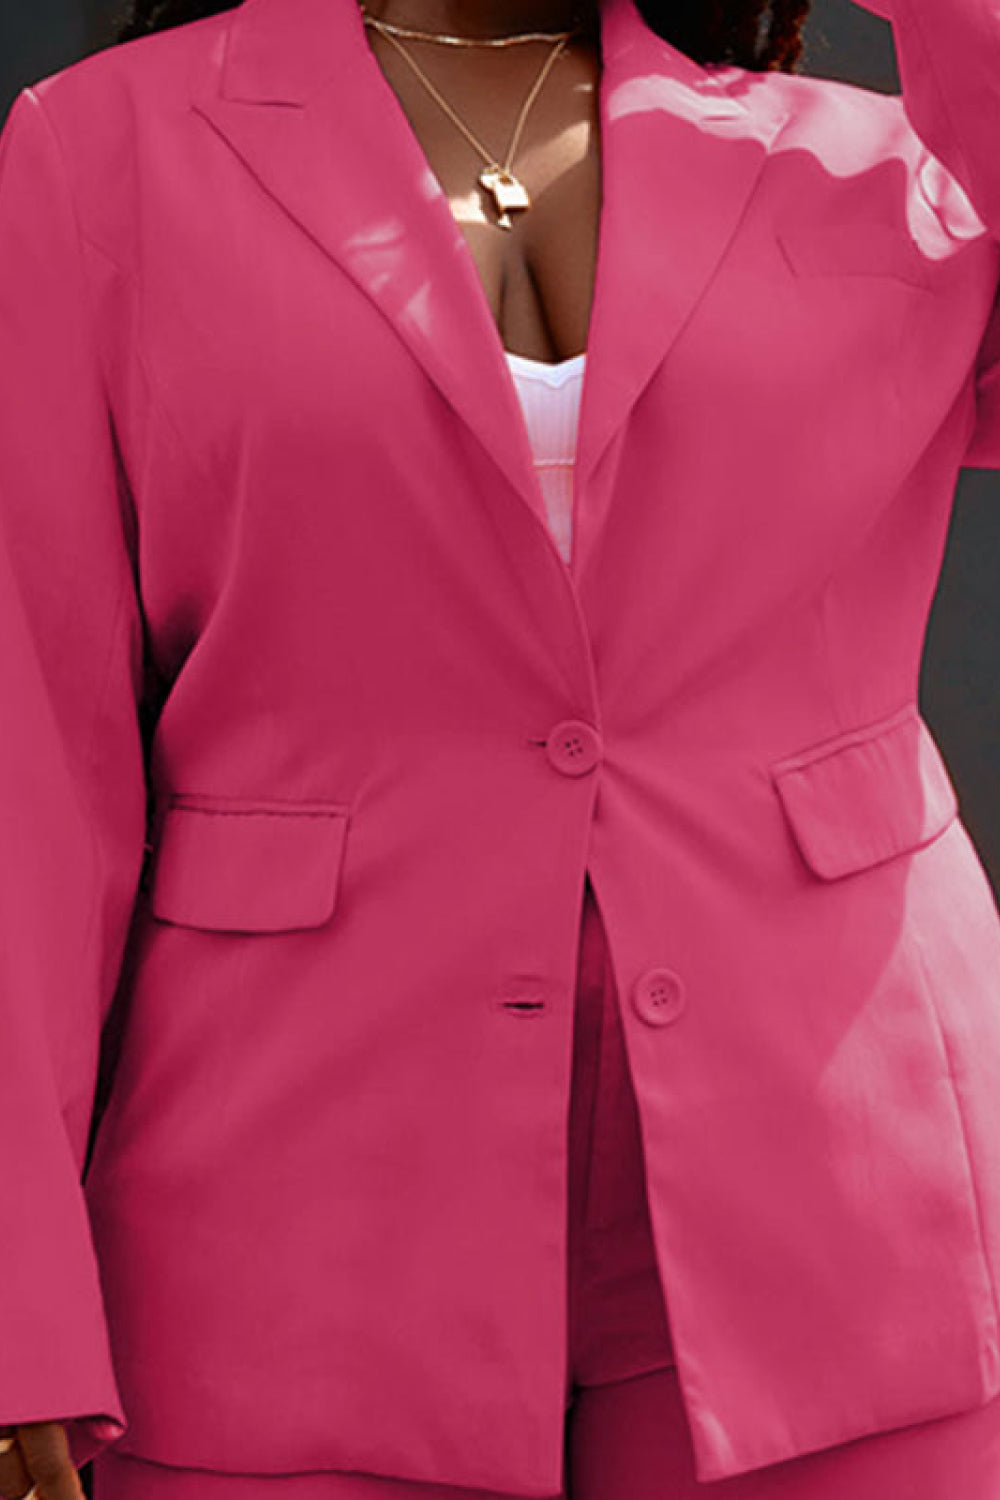 Classy Strawberry Lapel Collared Suit (S - 2X)